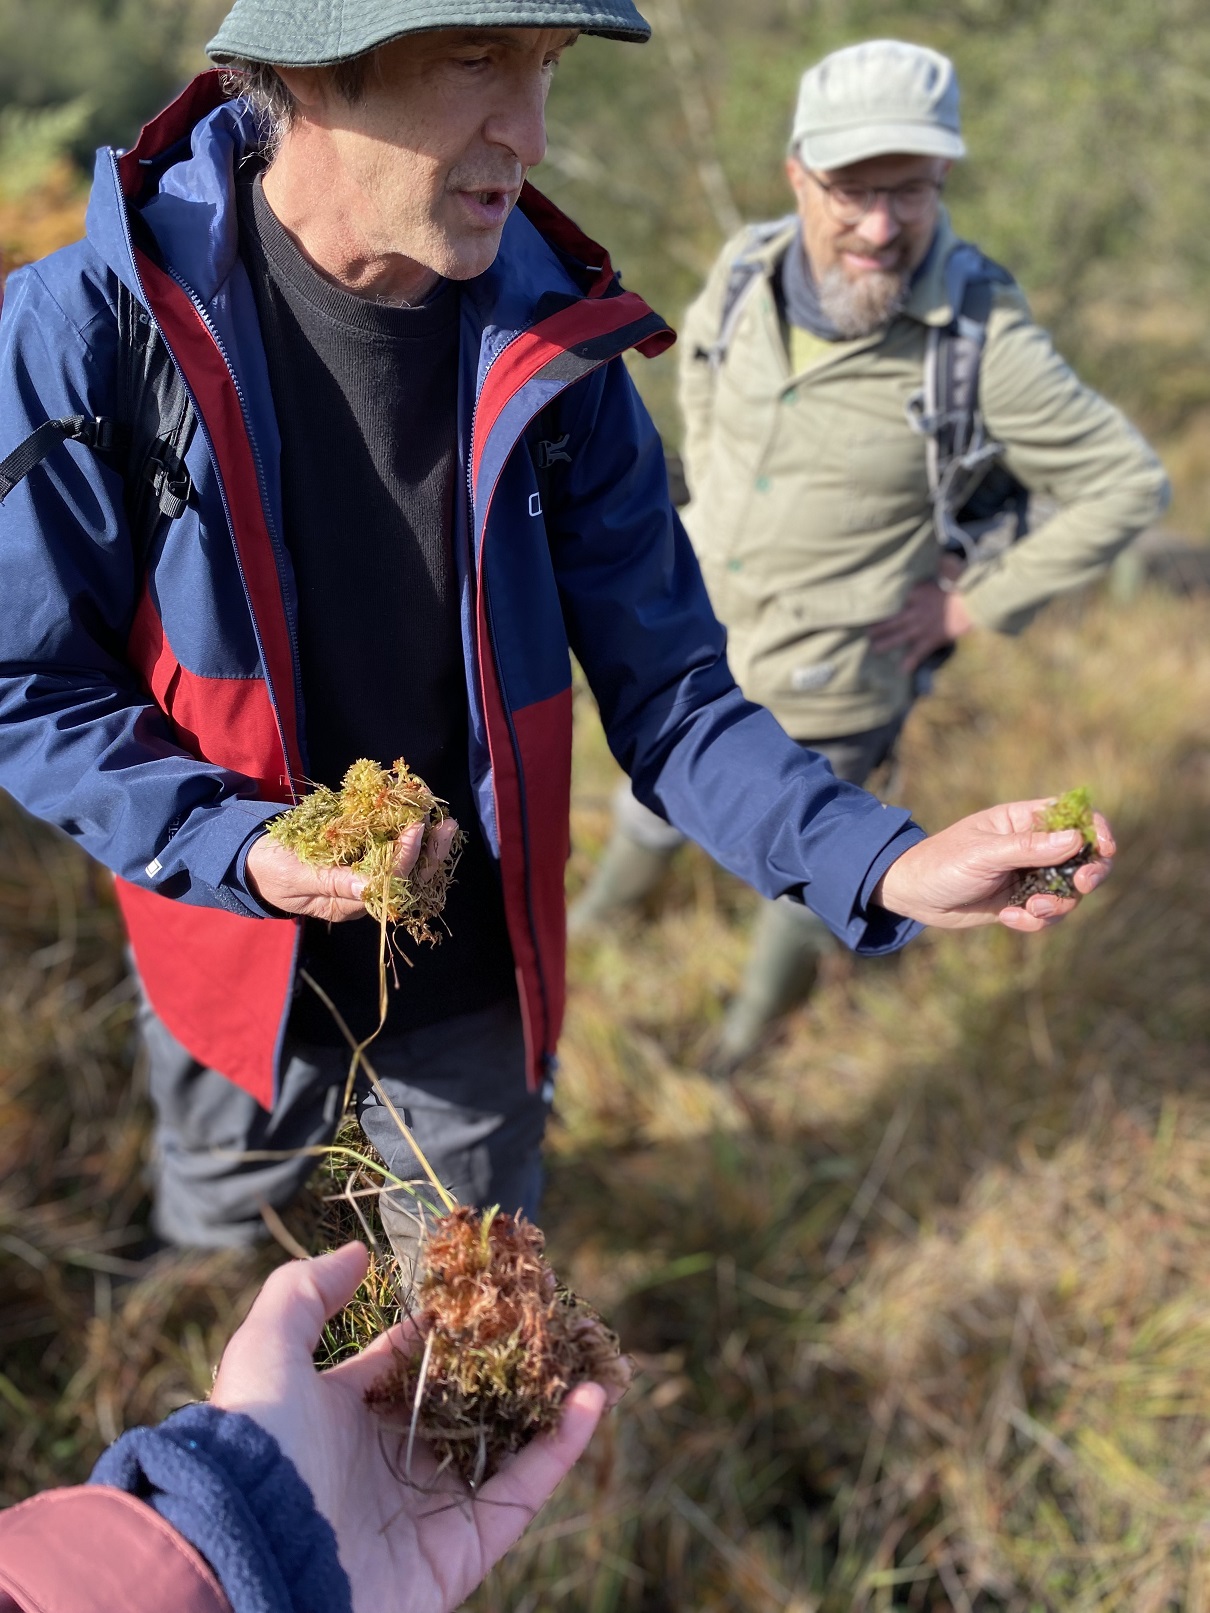 Dr David Smith sharing his knowledge about Sphagnum mosses.